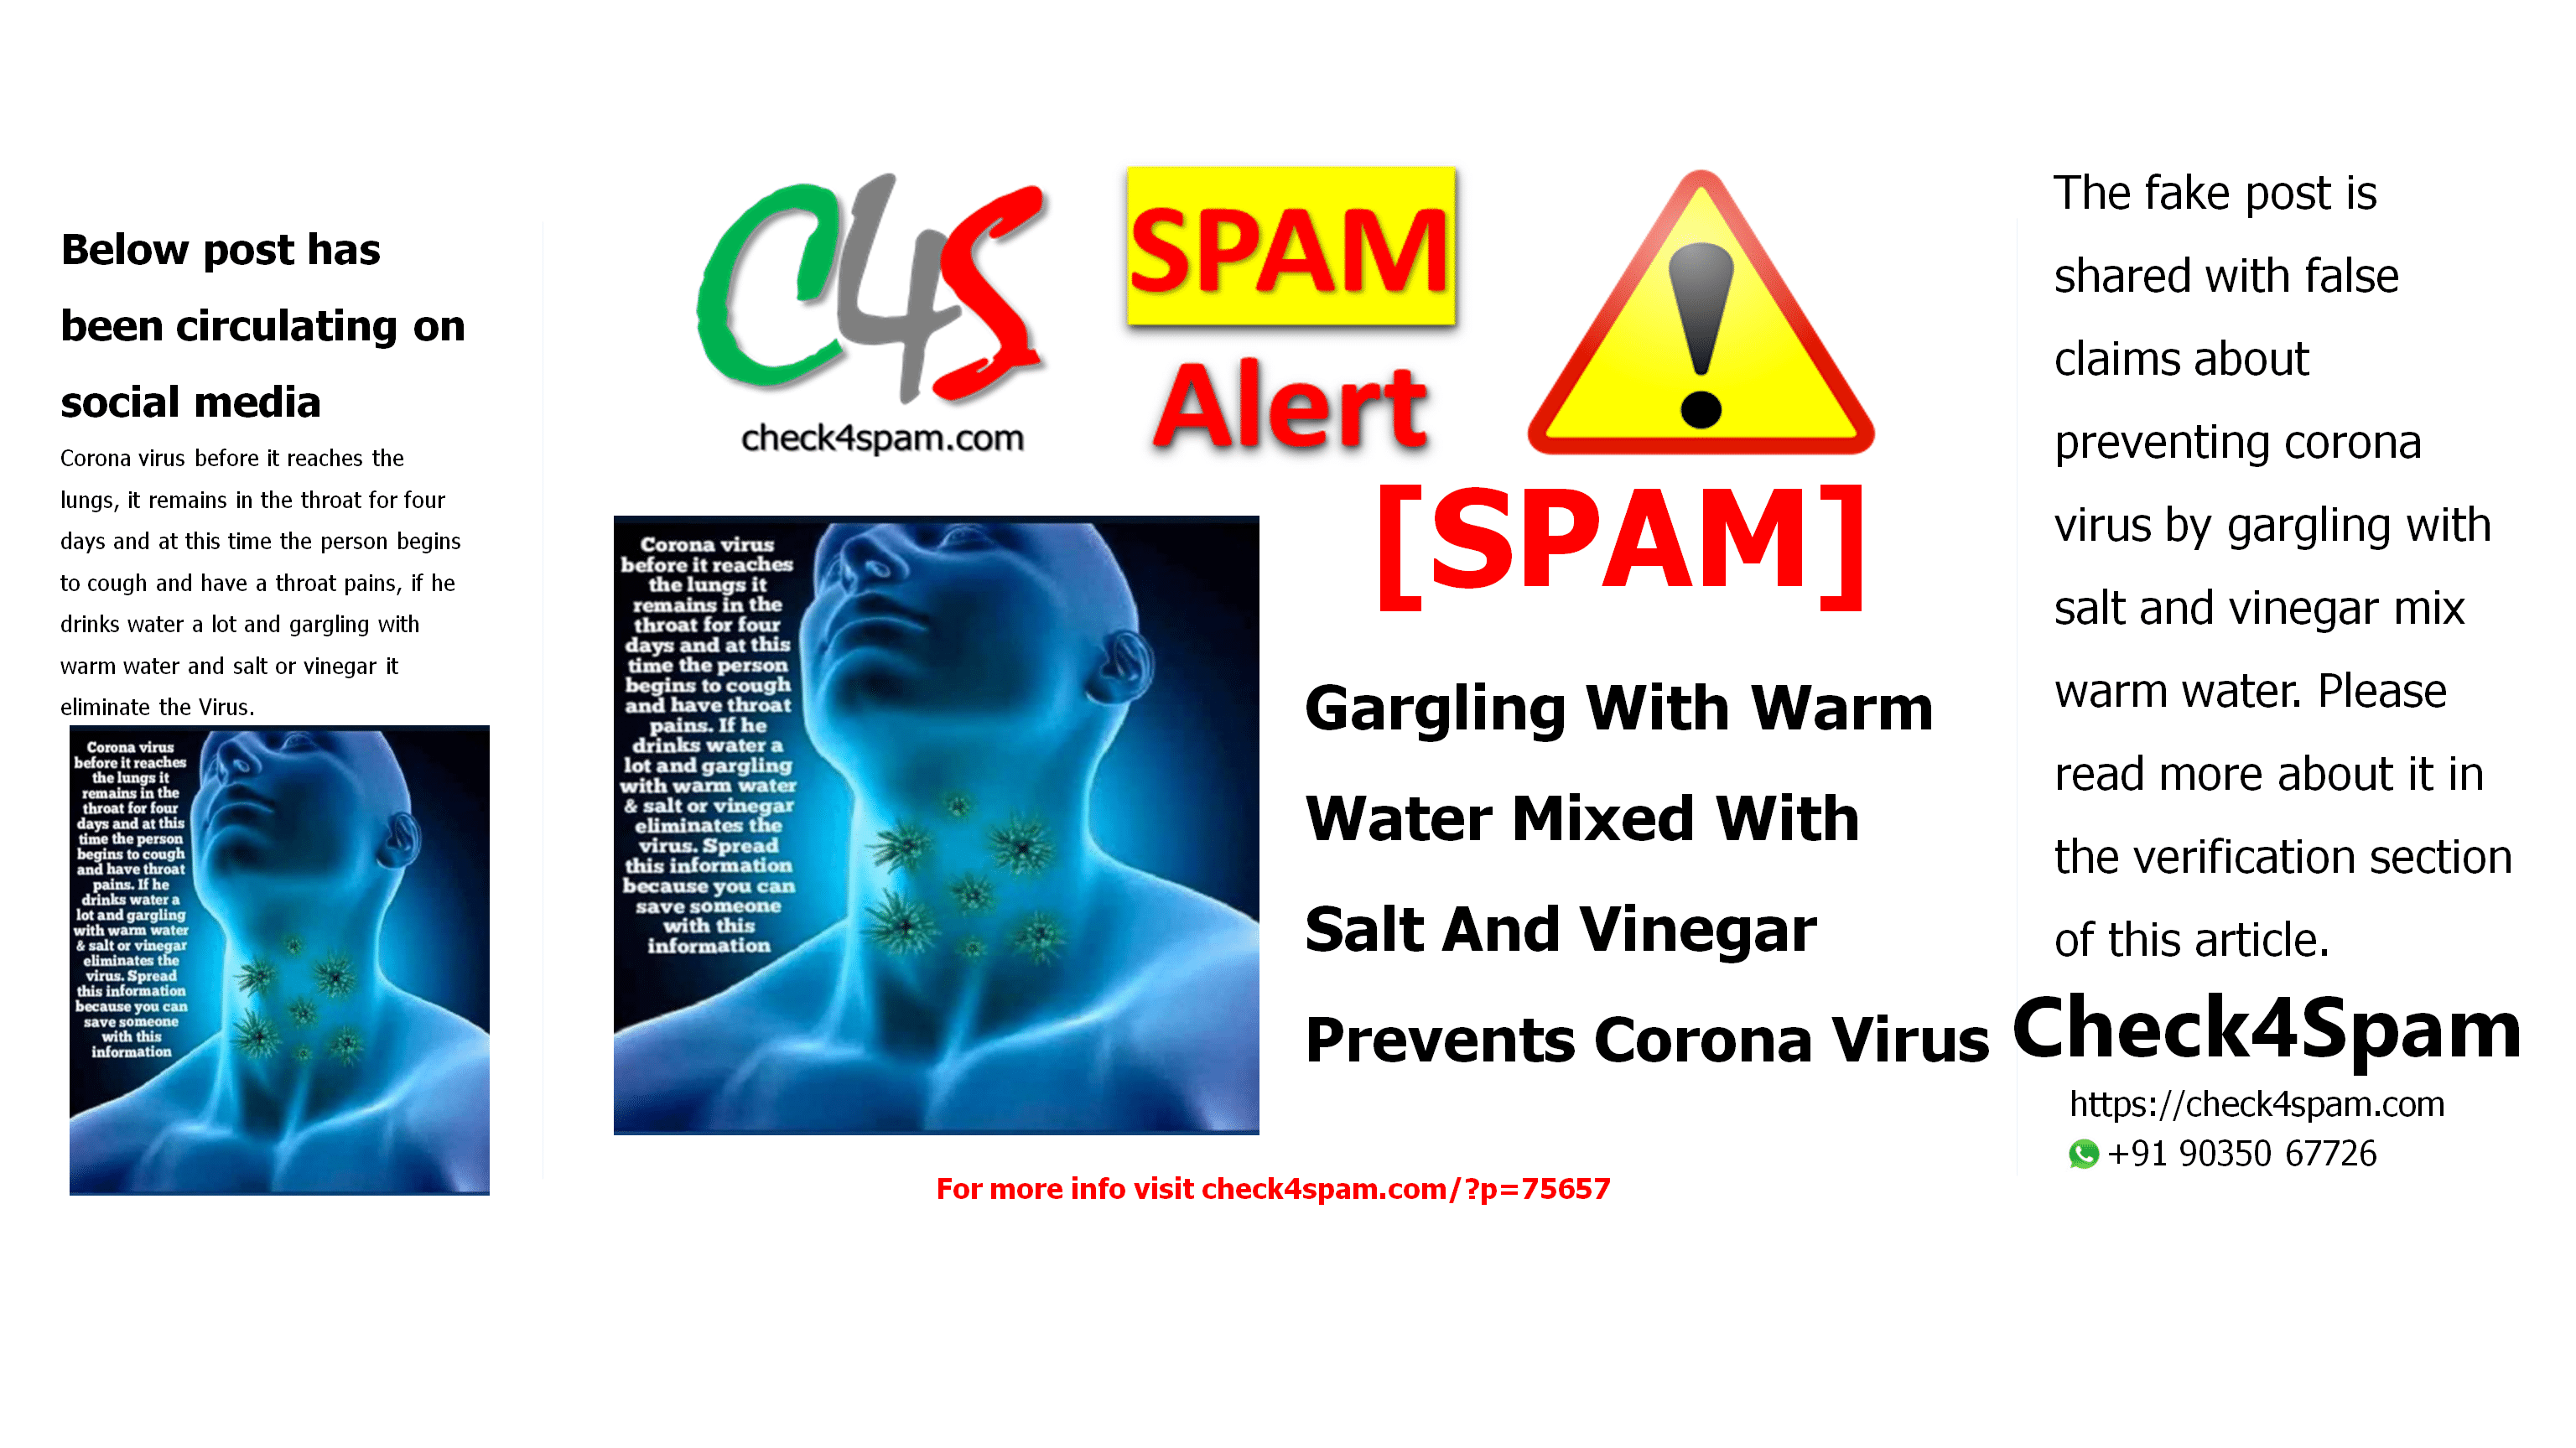 Gargling With Warm Water Mixed With Salt And Vinegar Prevents Coronavirus